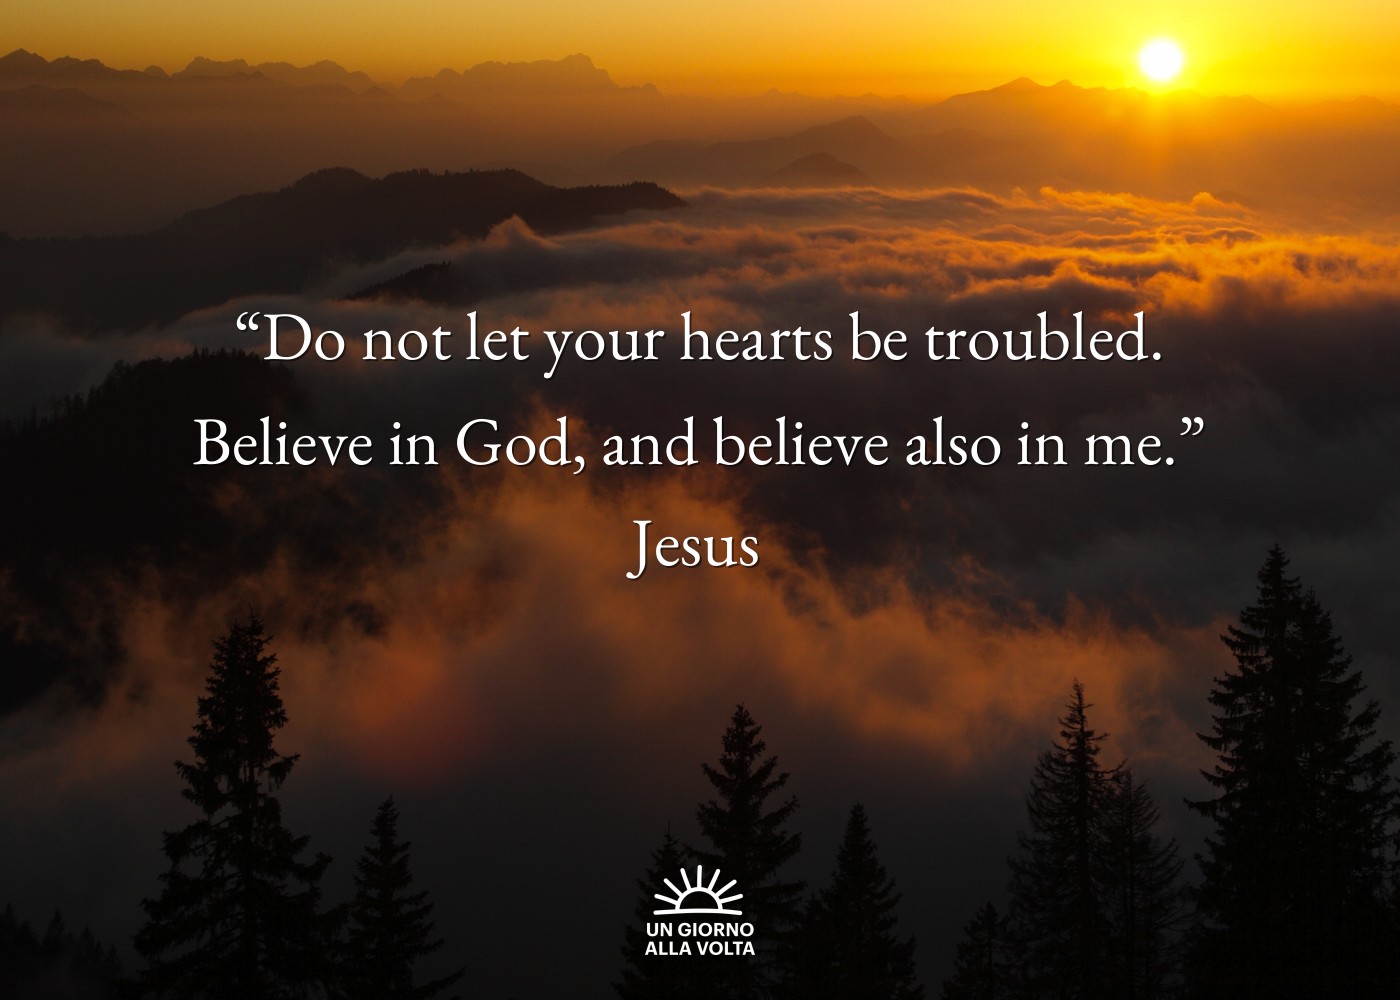 “Do not let your hearts be troubled.
Believe in God, and believe also in me.”
Jesus
